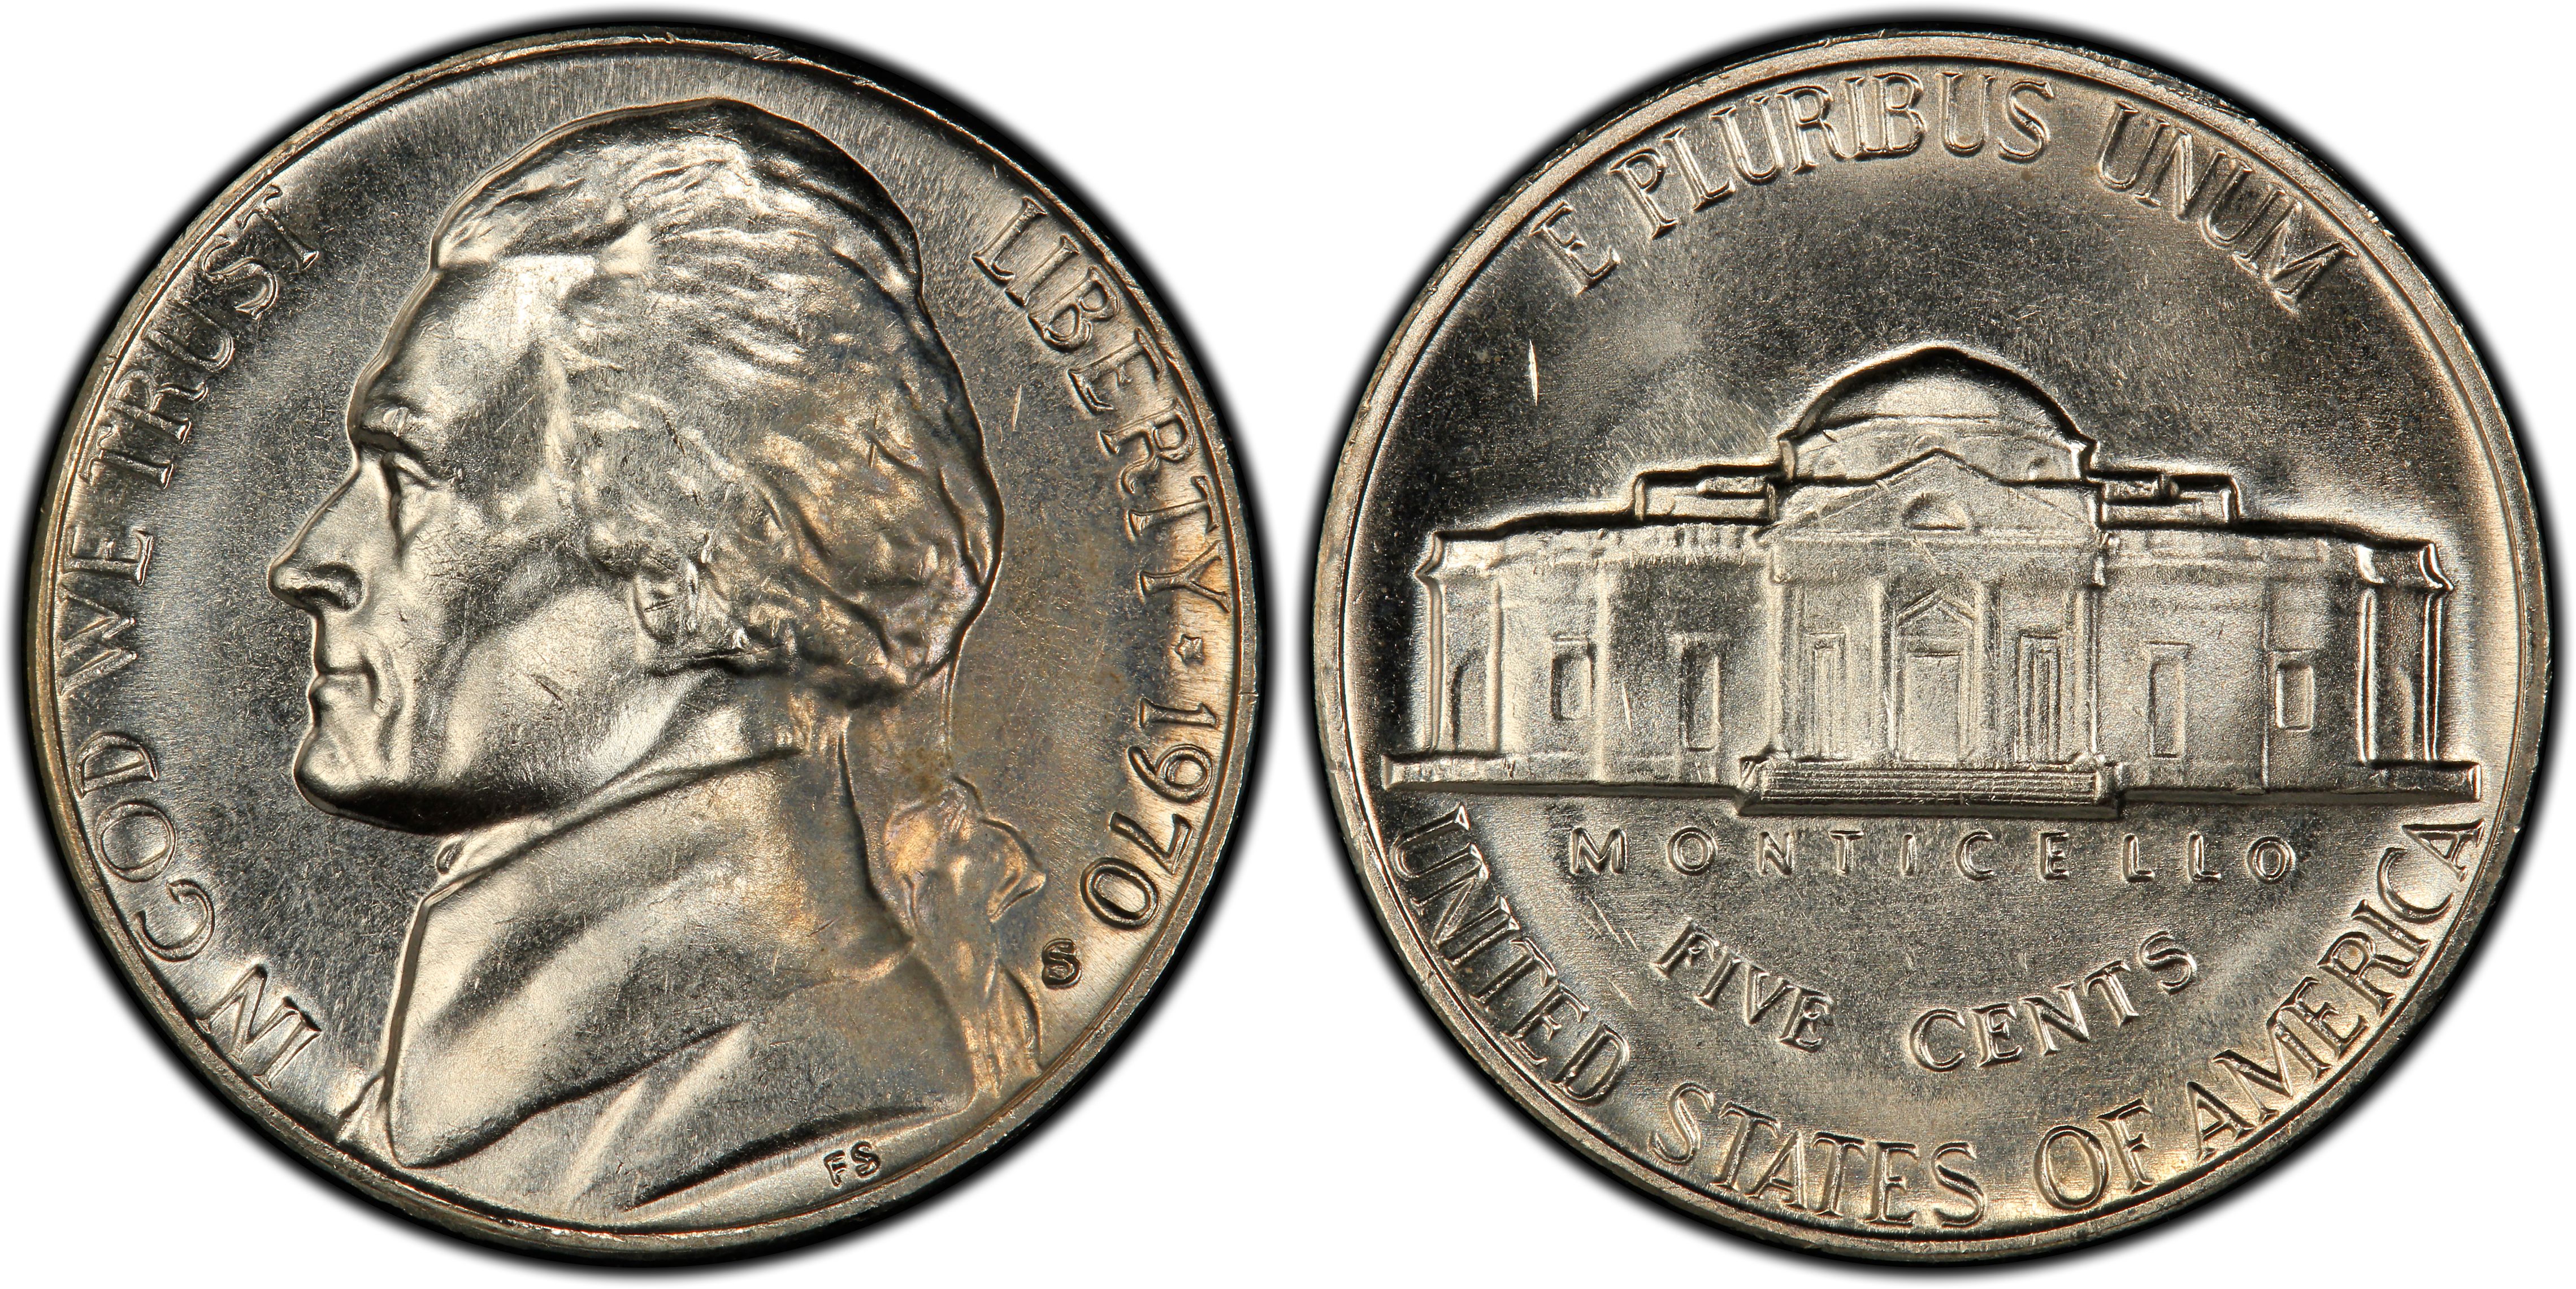 Details about   1970 S Jefferson Proof Nickel beautifully struck    L03 